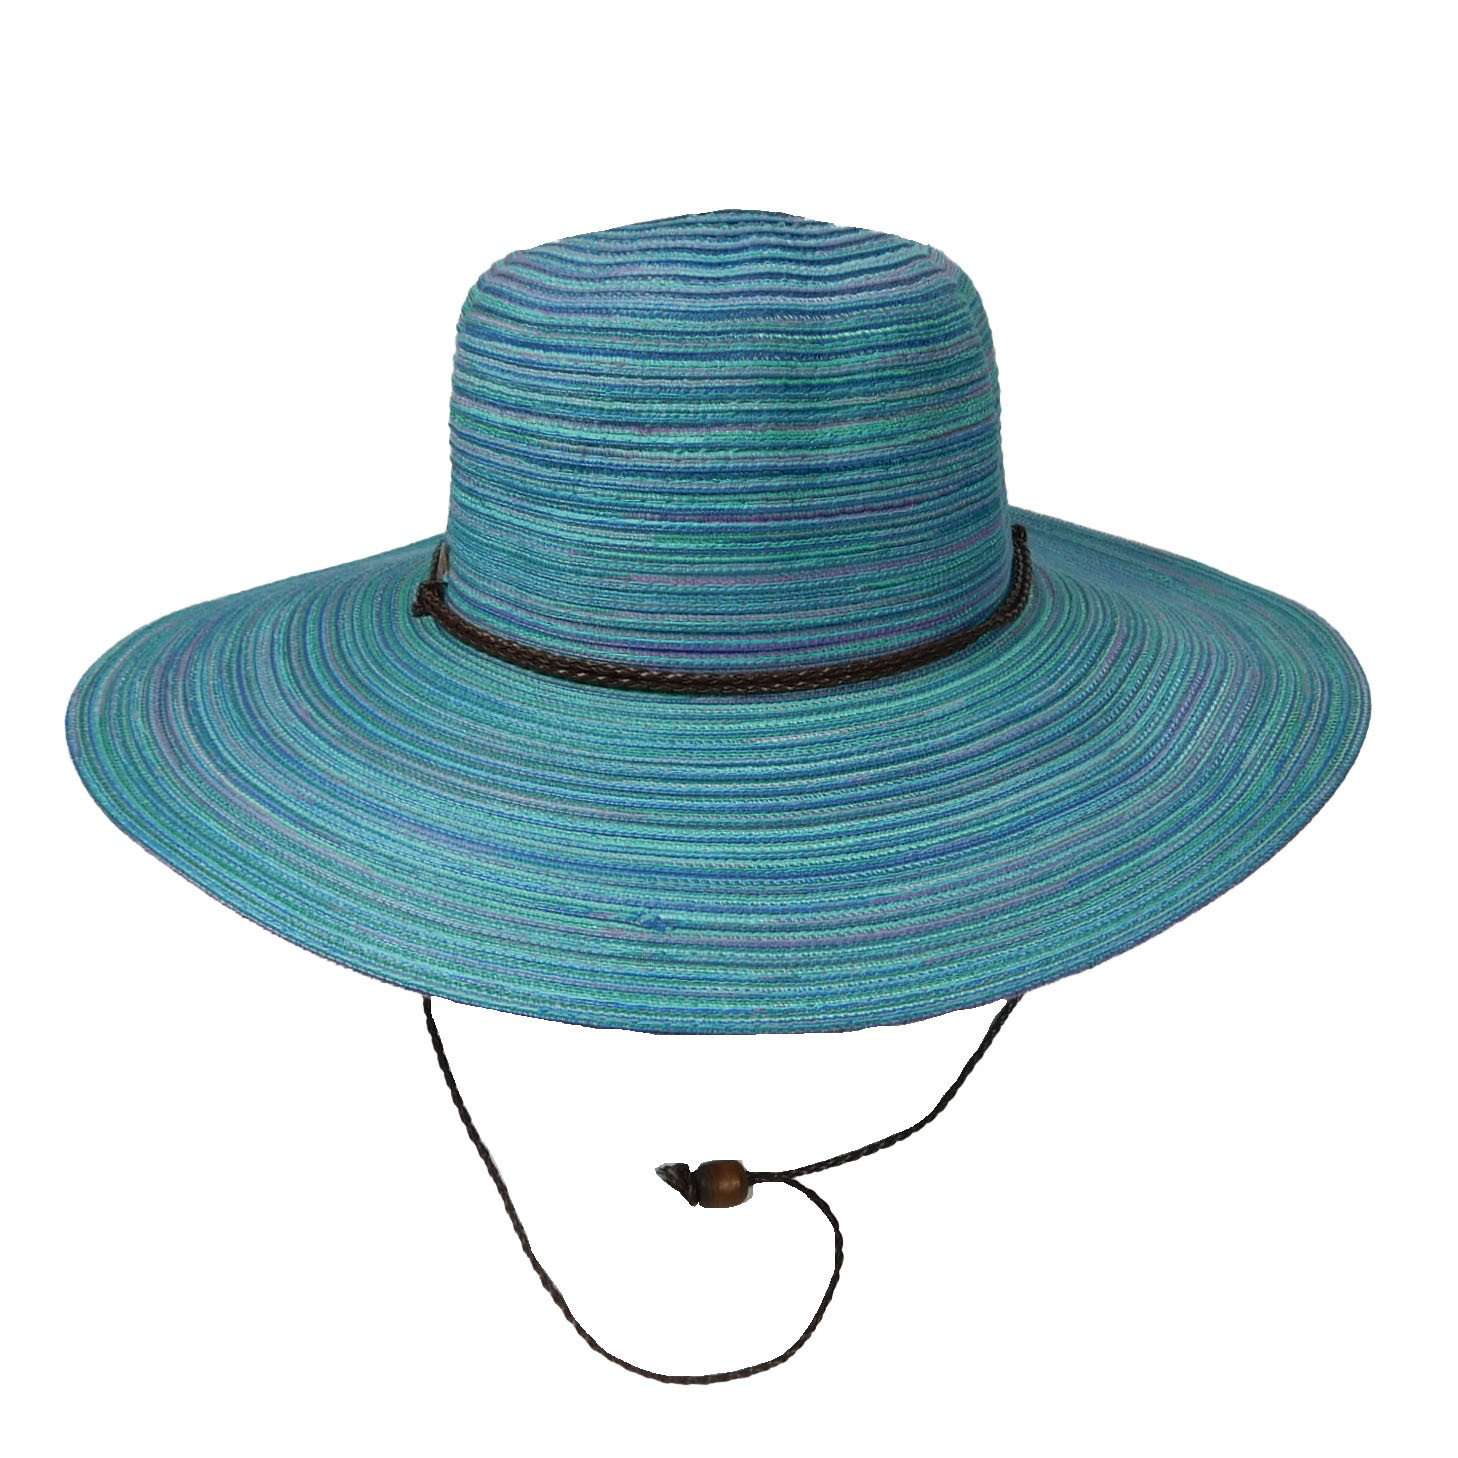 Floppy Hat with Chin Cord by Cappelli Floppy Hat Cappelli Straworld csw202TQ Turquoise Medium (57 cm) 